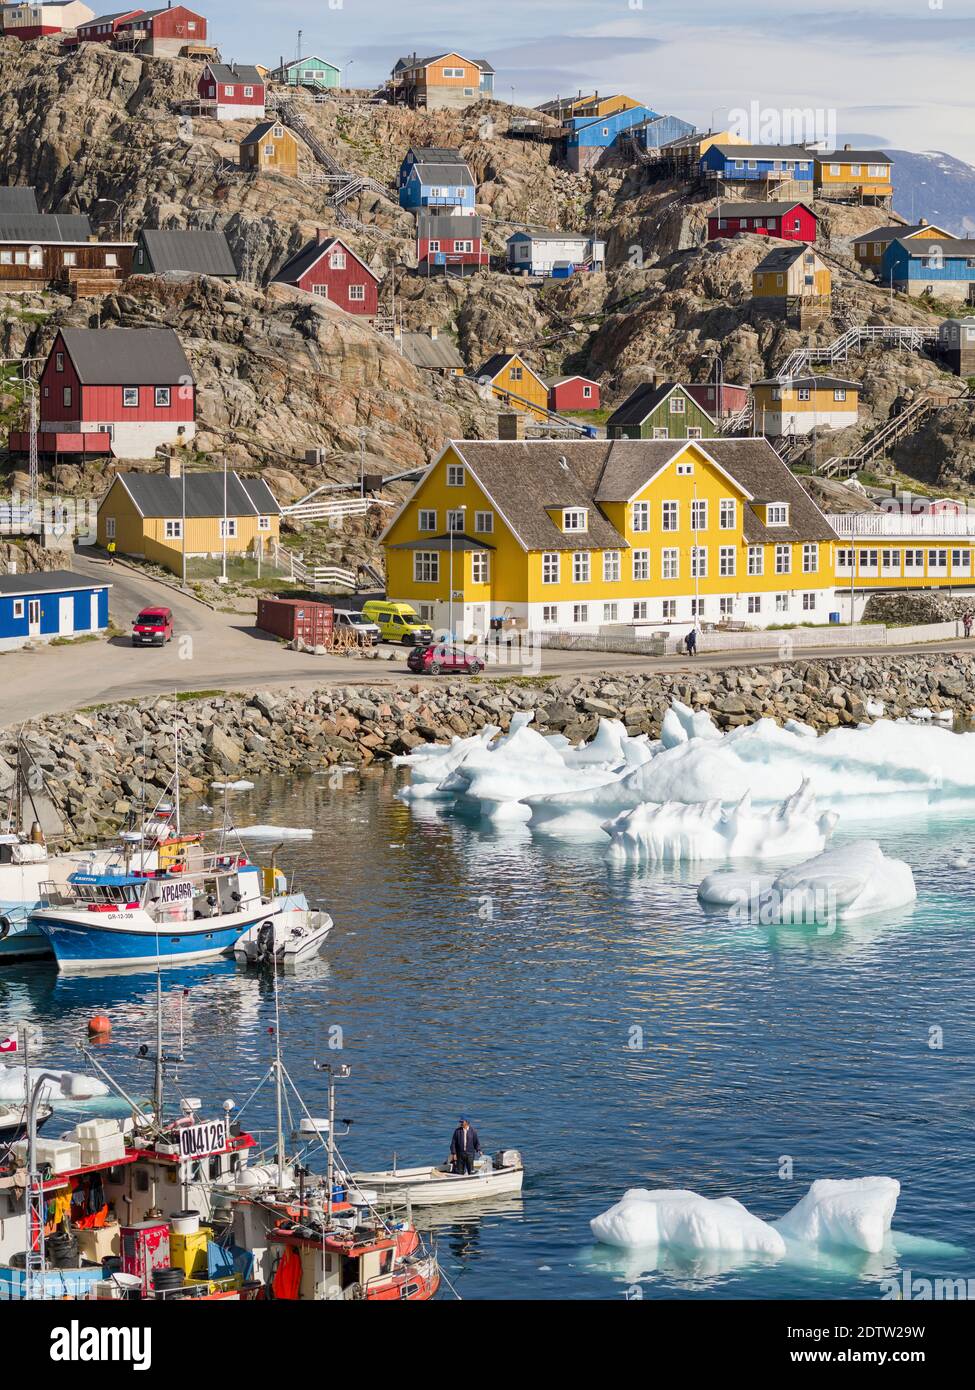 The harbour.  The town Uummannaq in the north of West Greenland, located on an island  in the Uummannaq Fjord System. America, North America, Greenlan Stock Photo